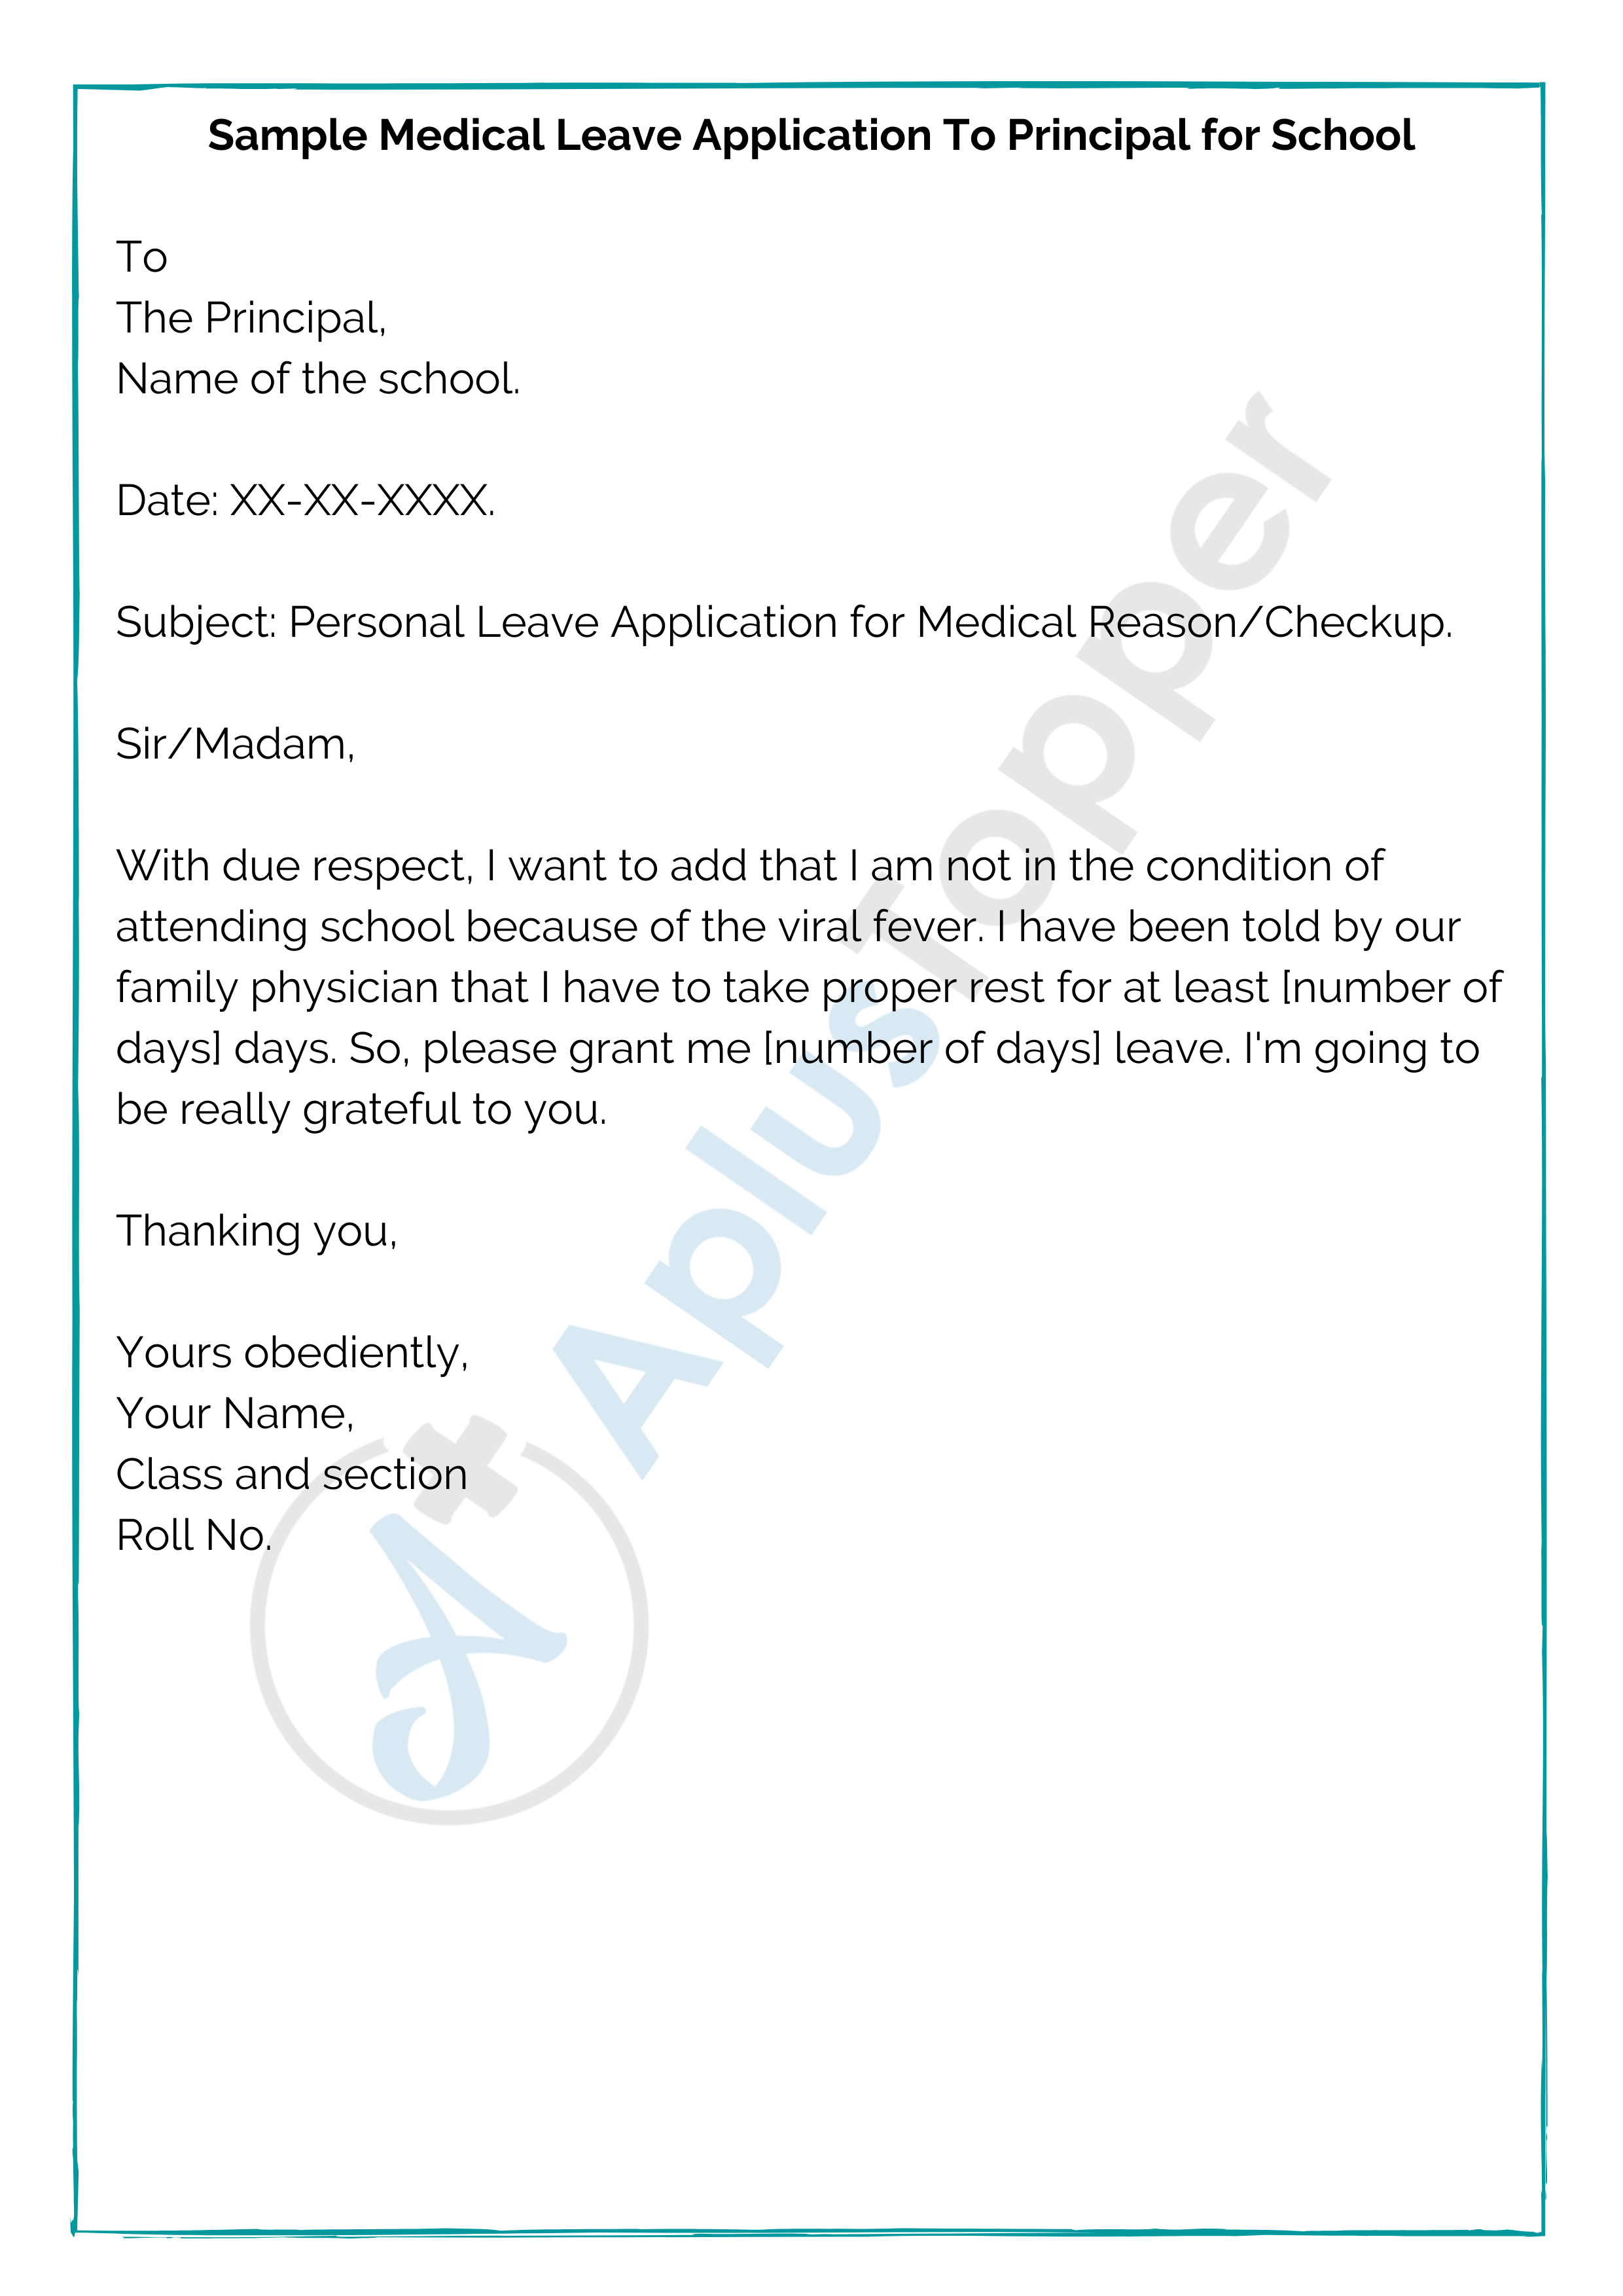 writing application to principal for leave